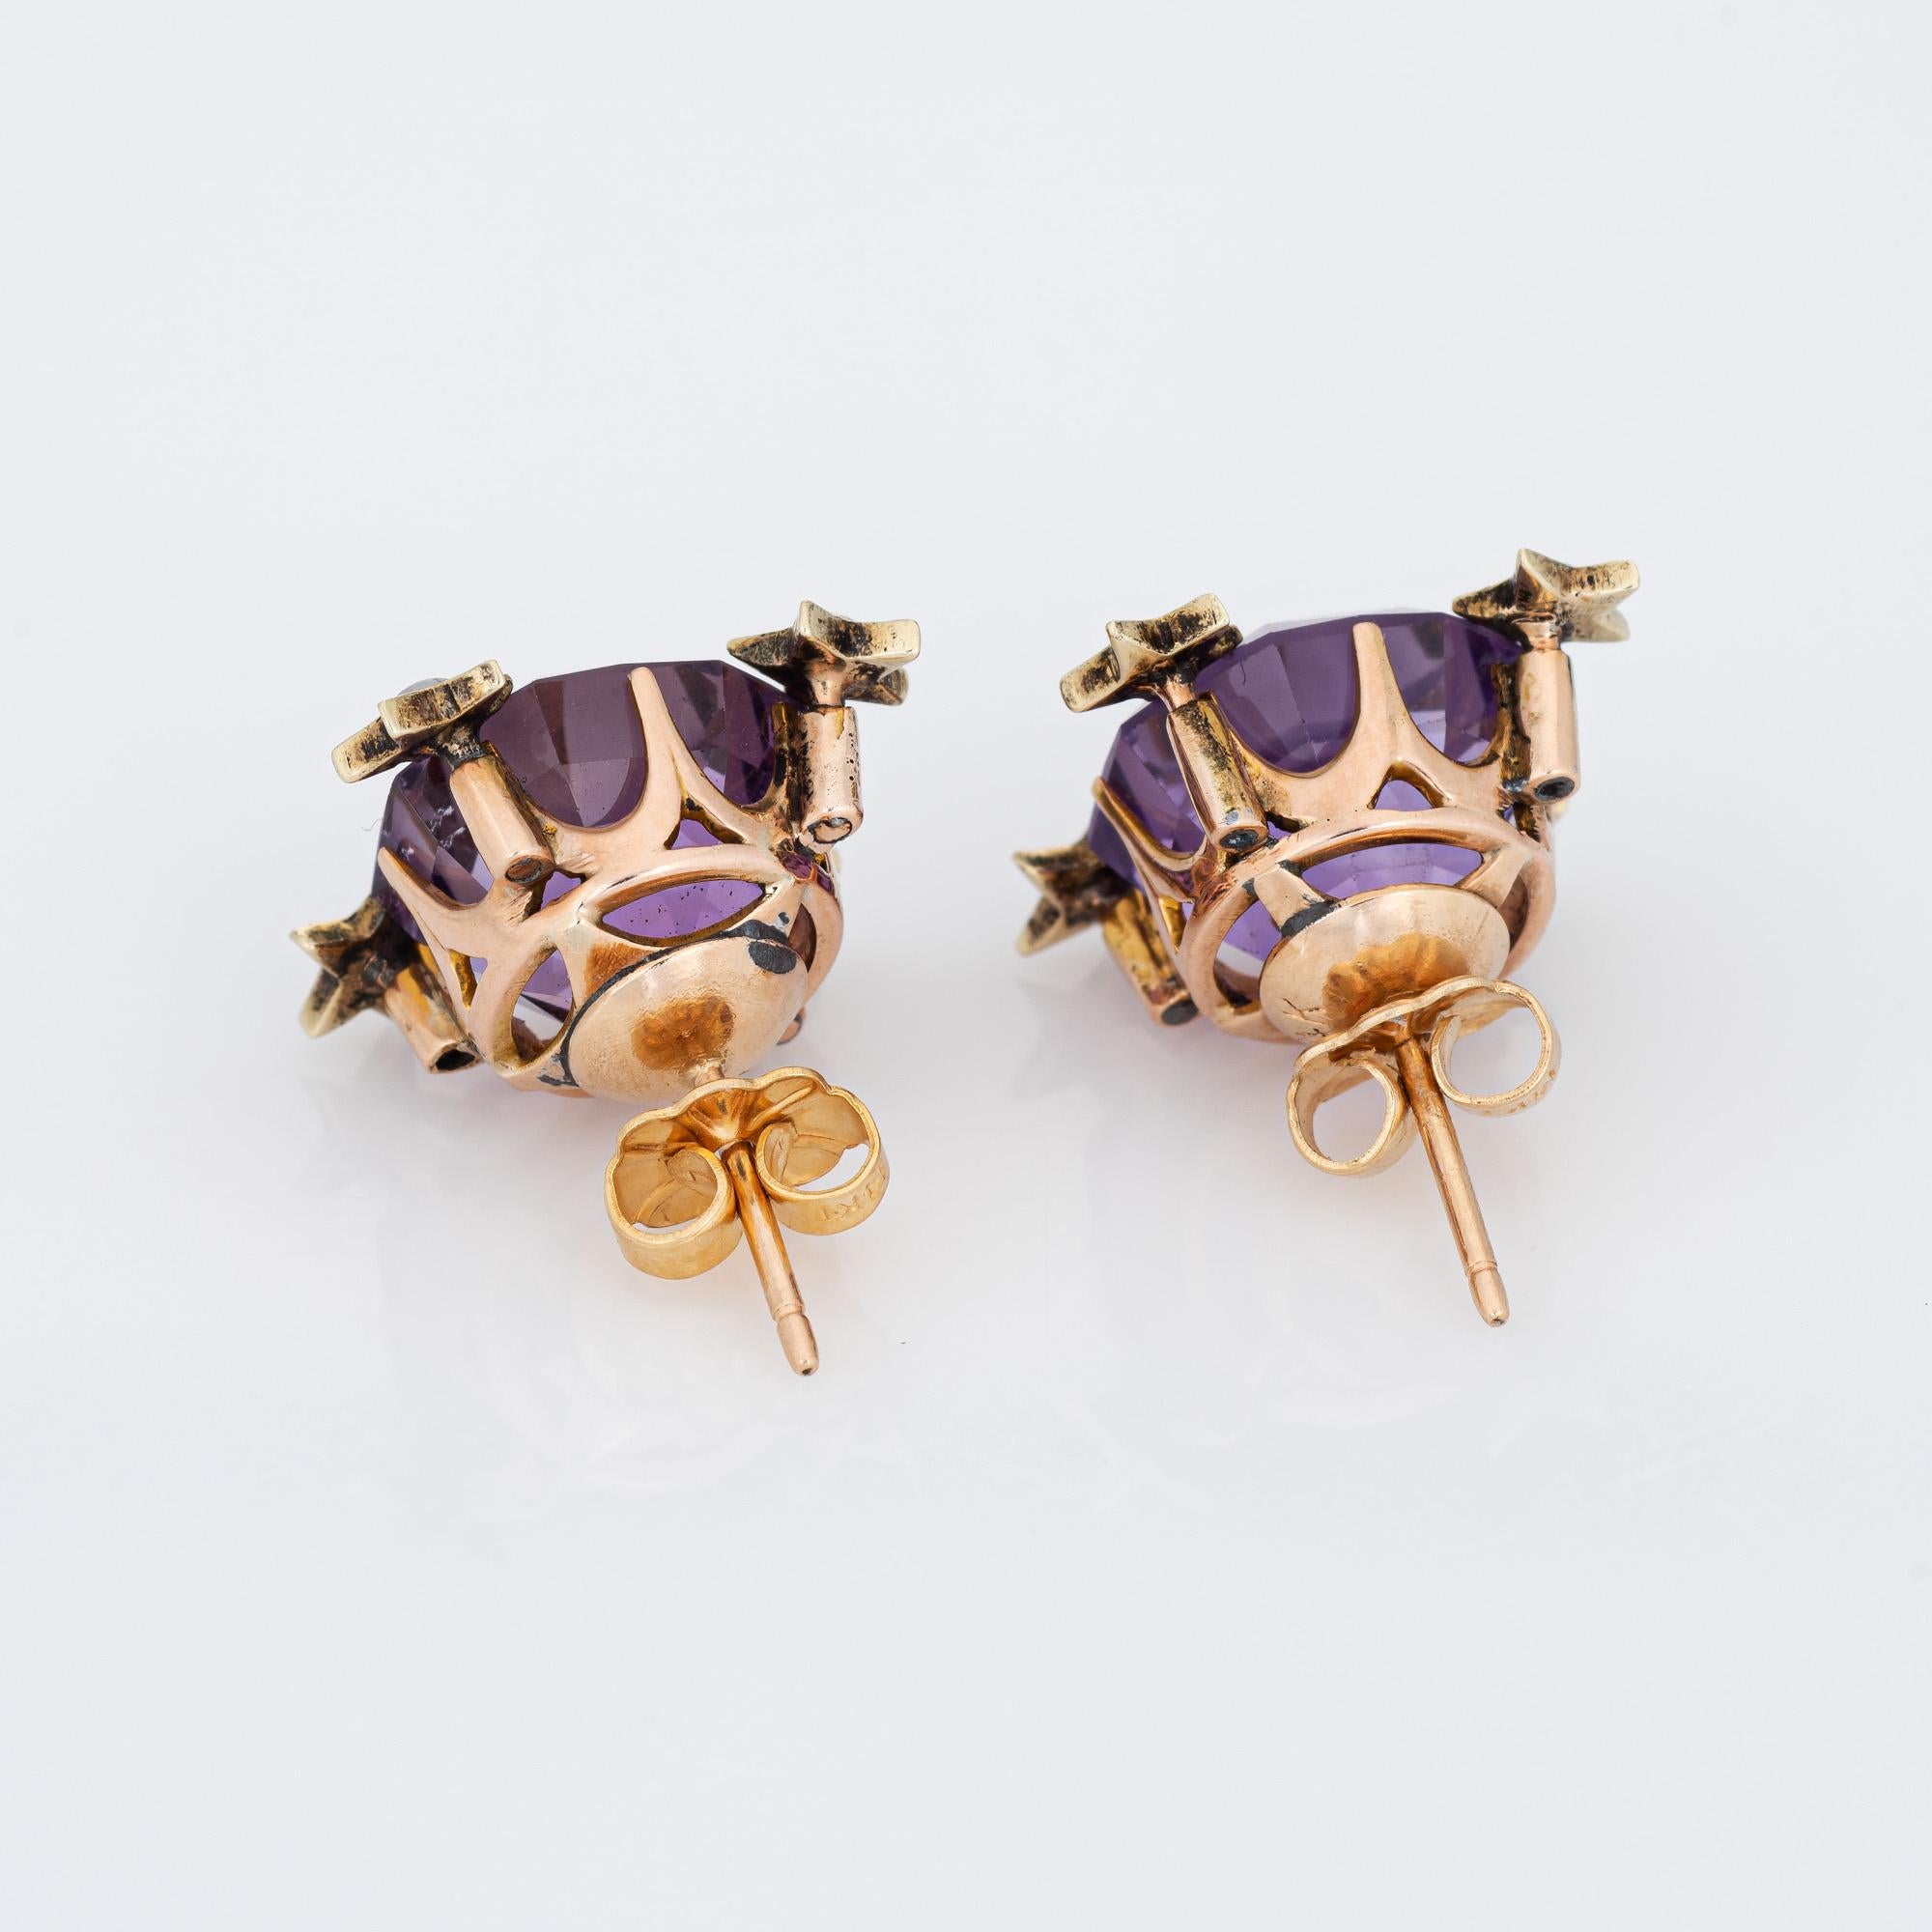 Finely detailed antique Victorian amethyst star earrings (circa 1880s to 1900s), crafted in 14 karat yellow gold. 

The amethysts measure 10.5mm each and total an estimated 4 carats each (8 carats total estimated weight). The amethysts are in very